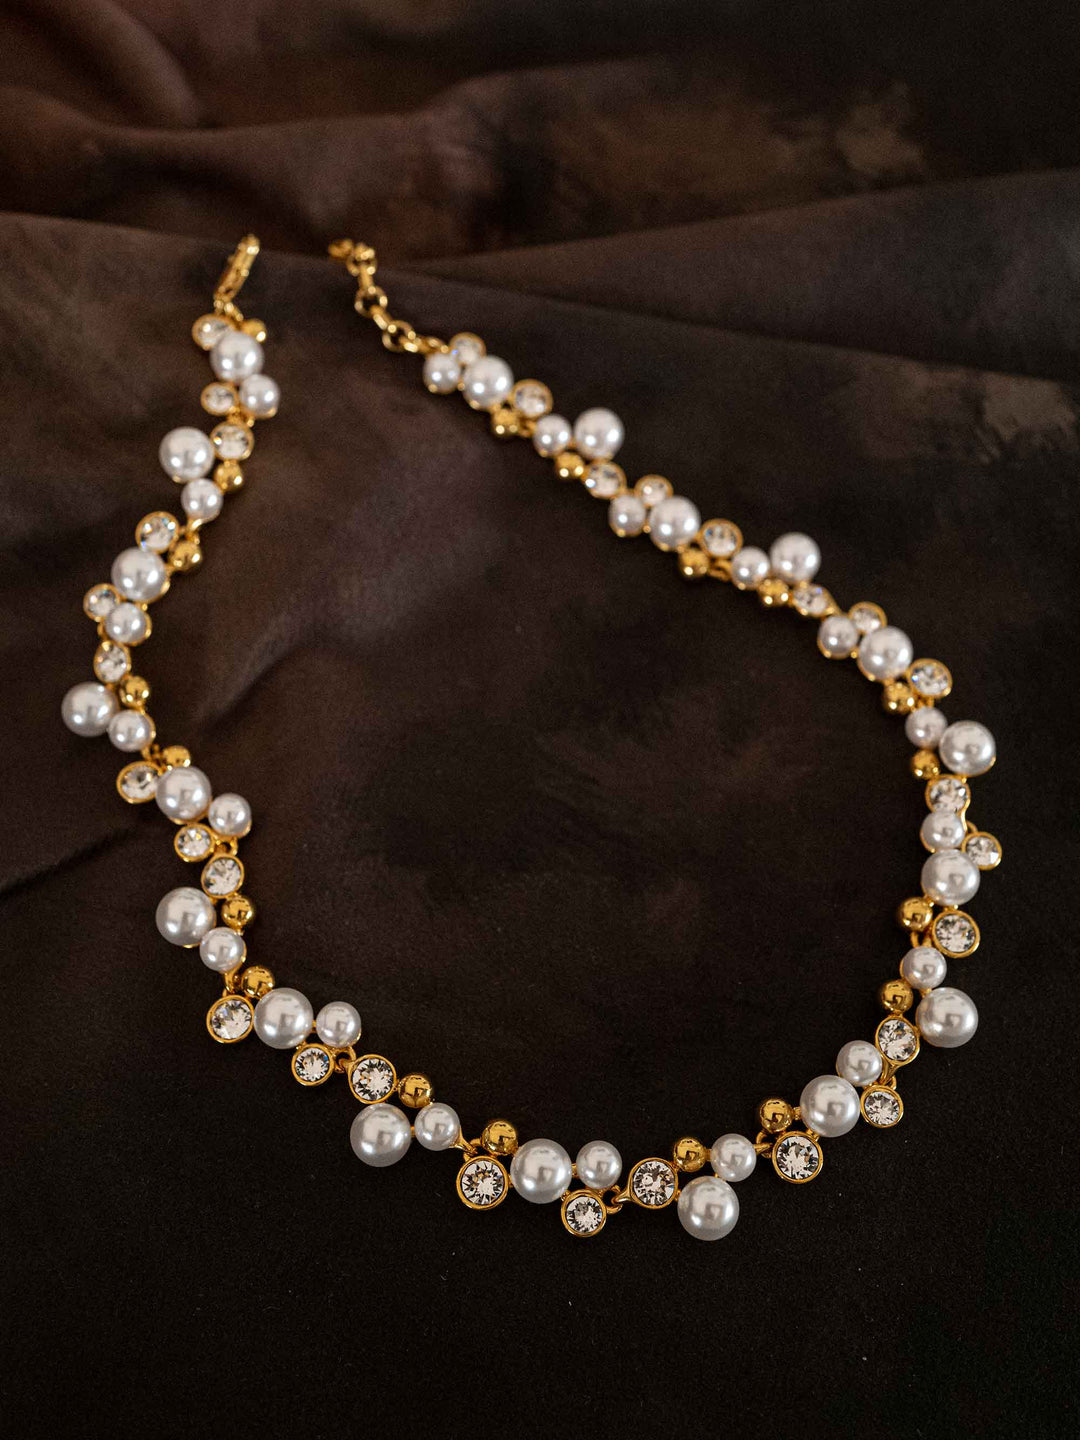 A necklace of pearls and glass crystals